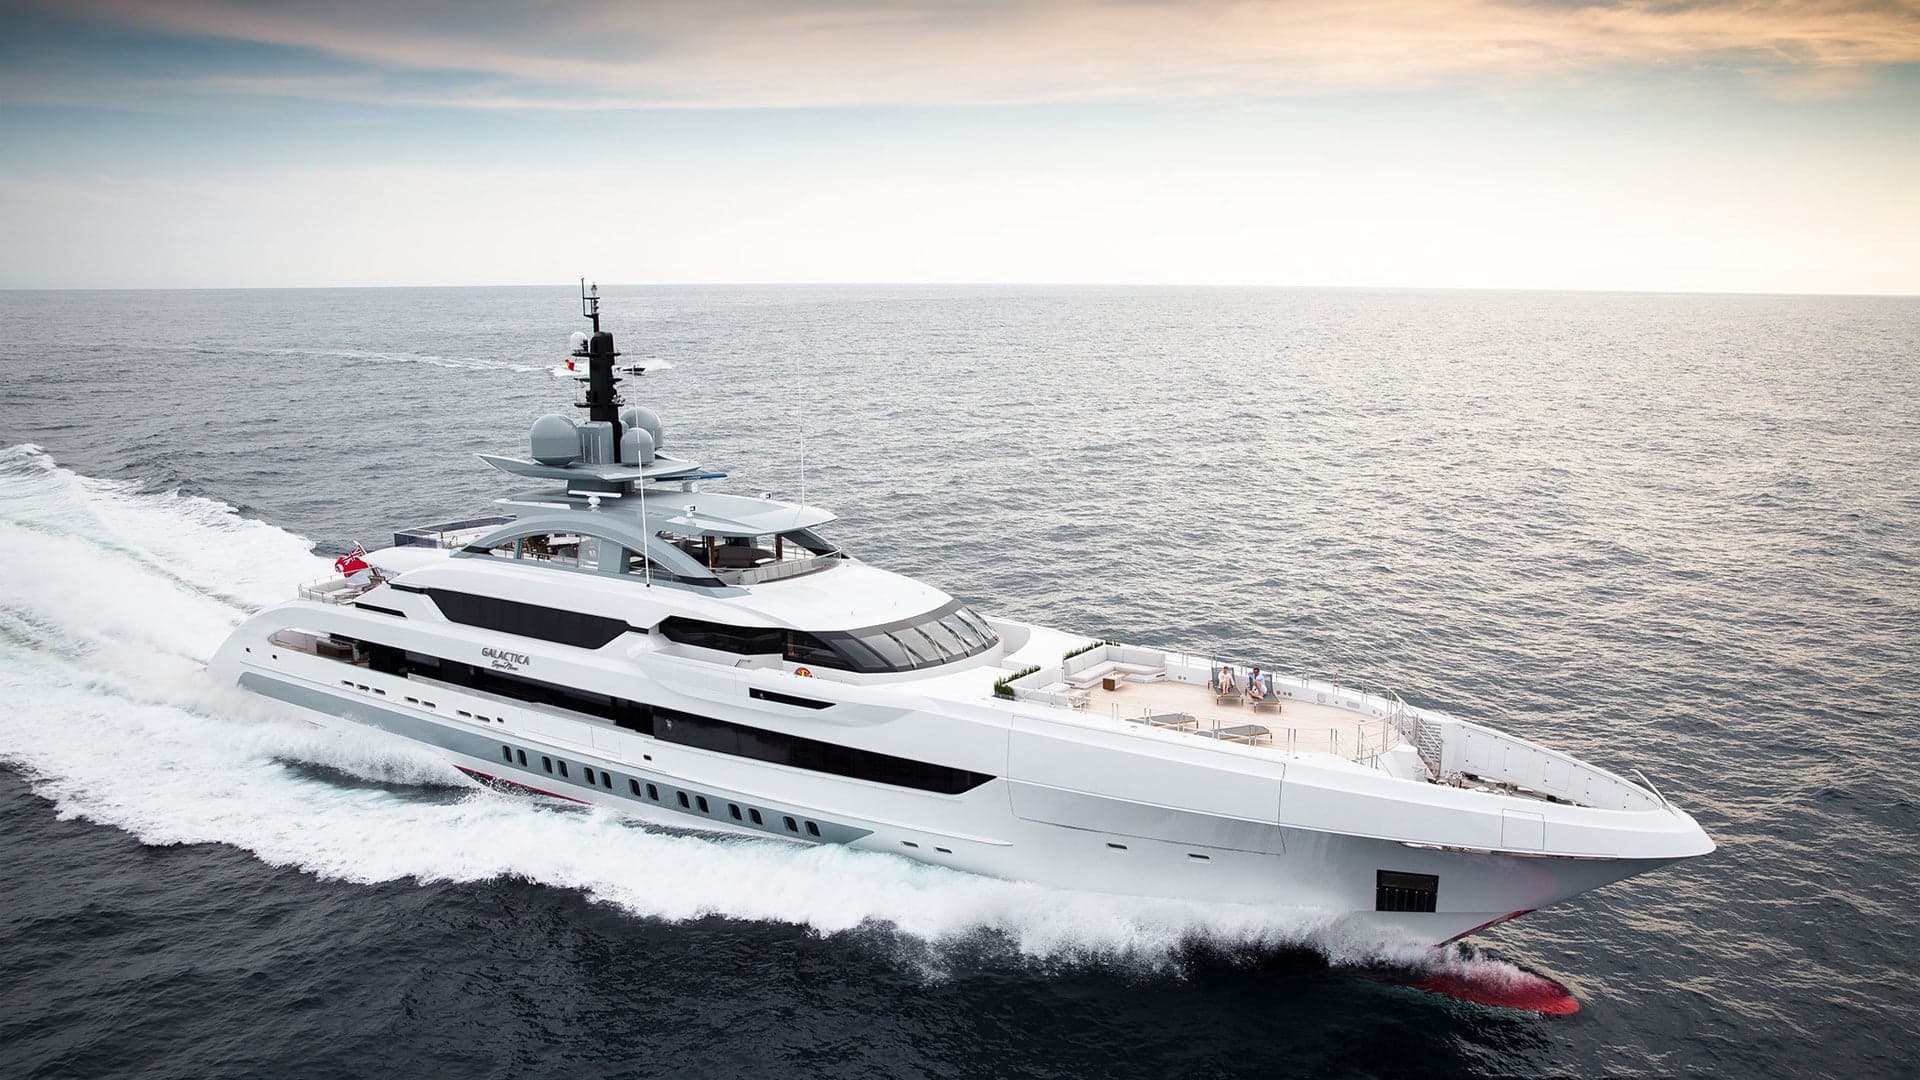 This 230-Foot Yacht Can Do 30 Knots, Has Its Own Waterfall